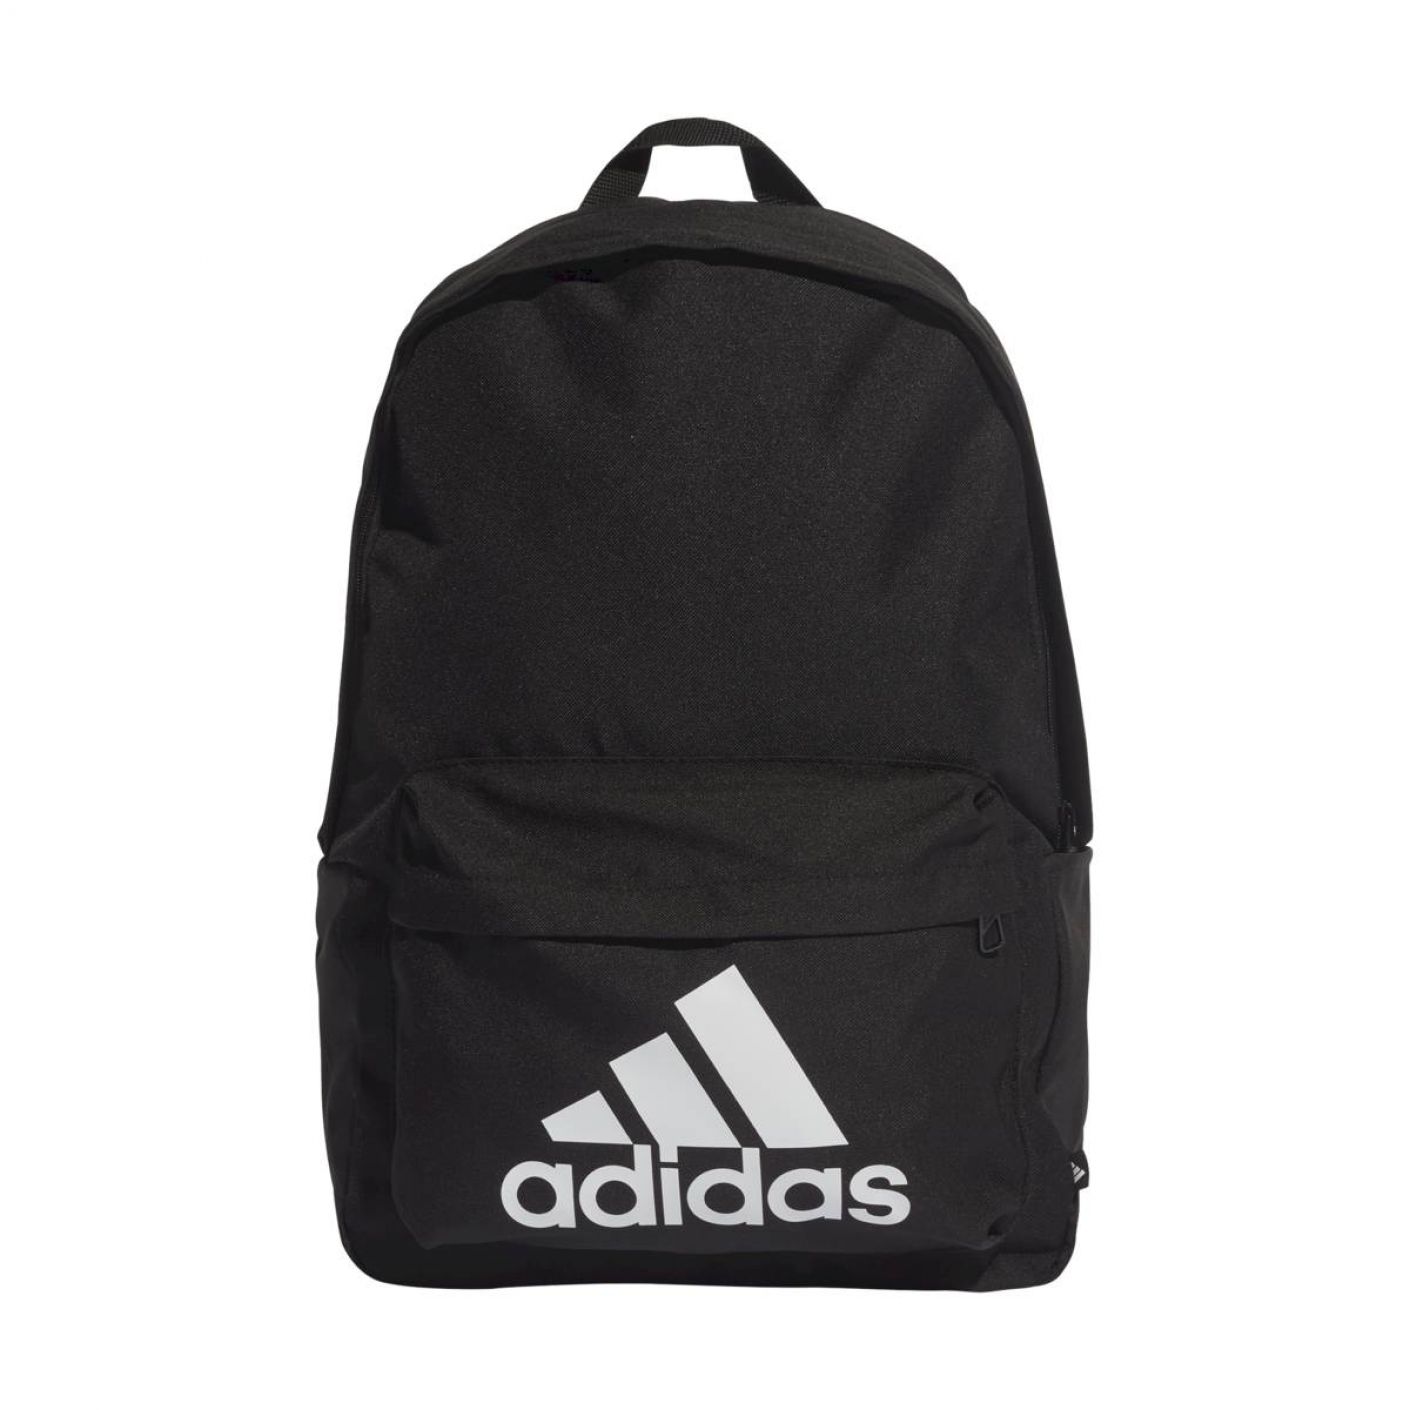 Adidas Classic Bos Backpack Nero